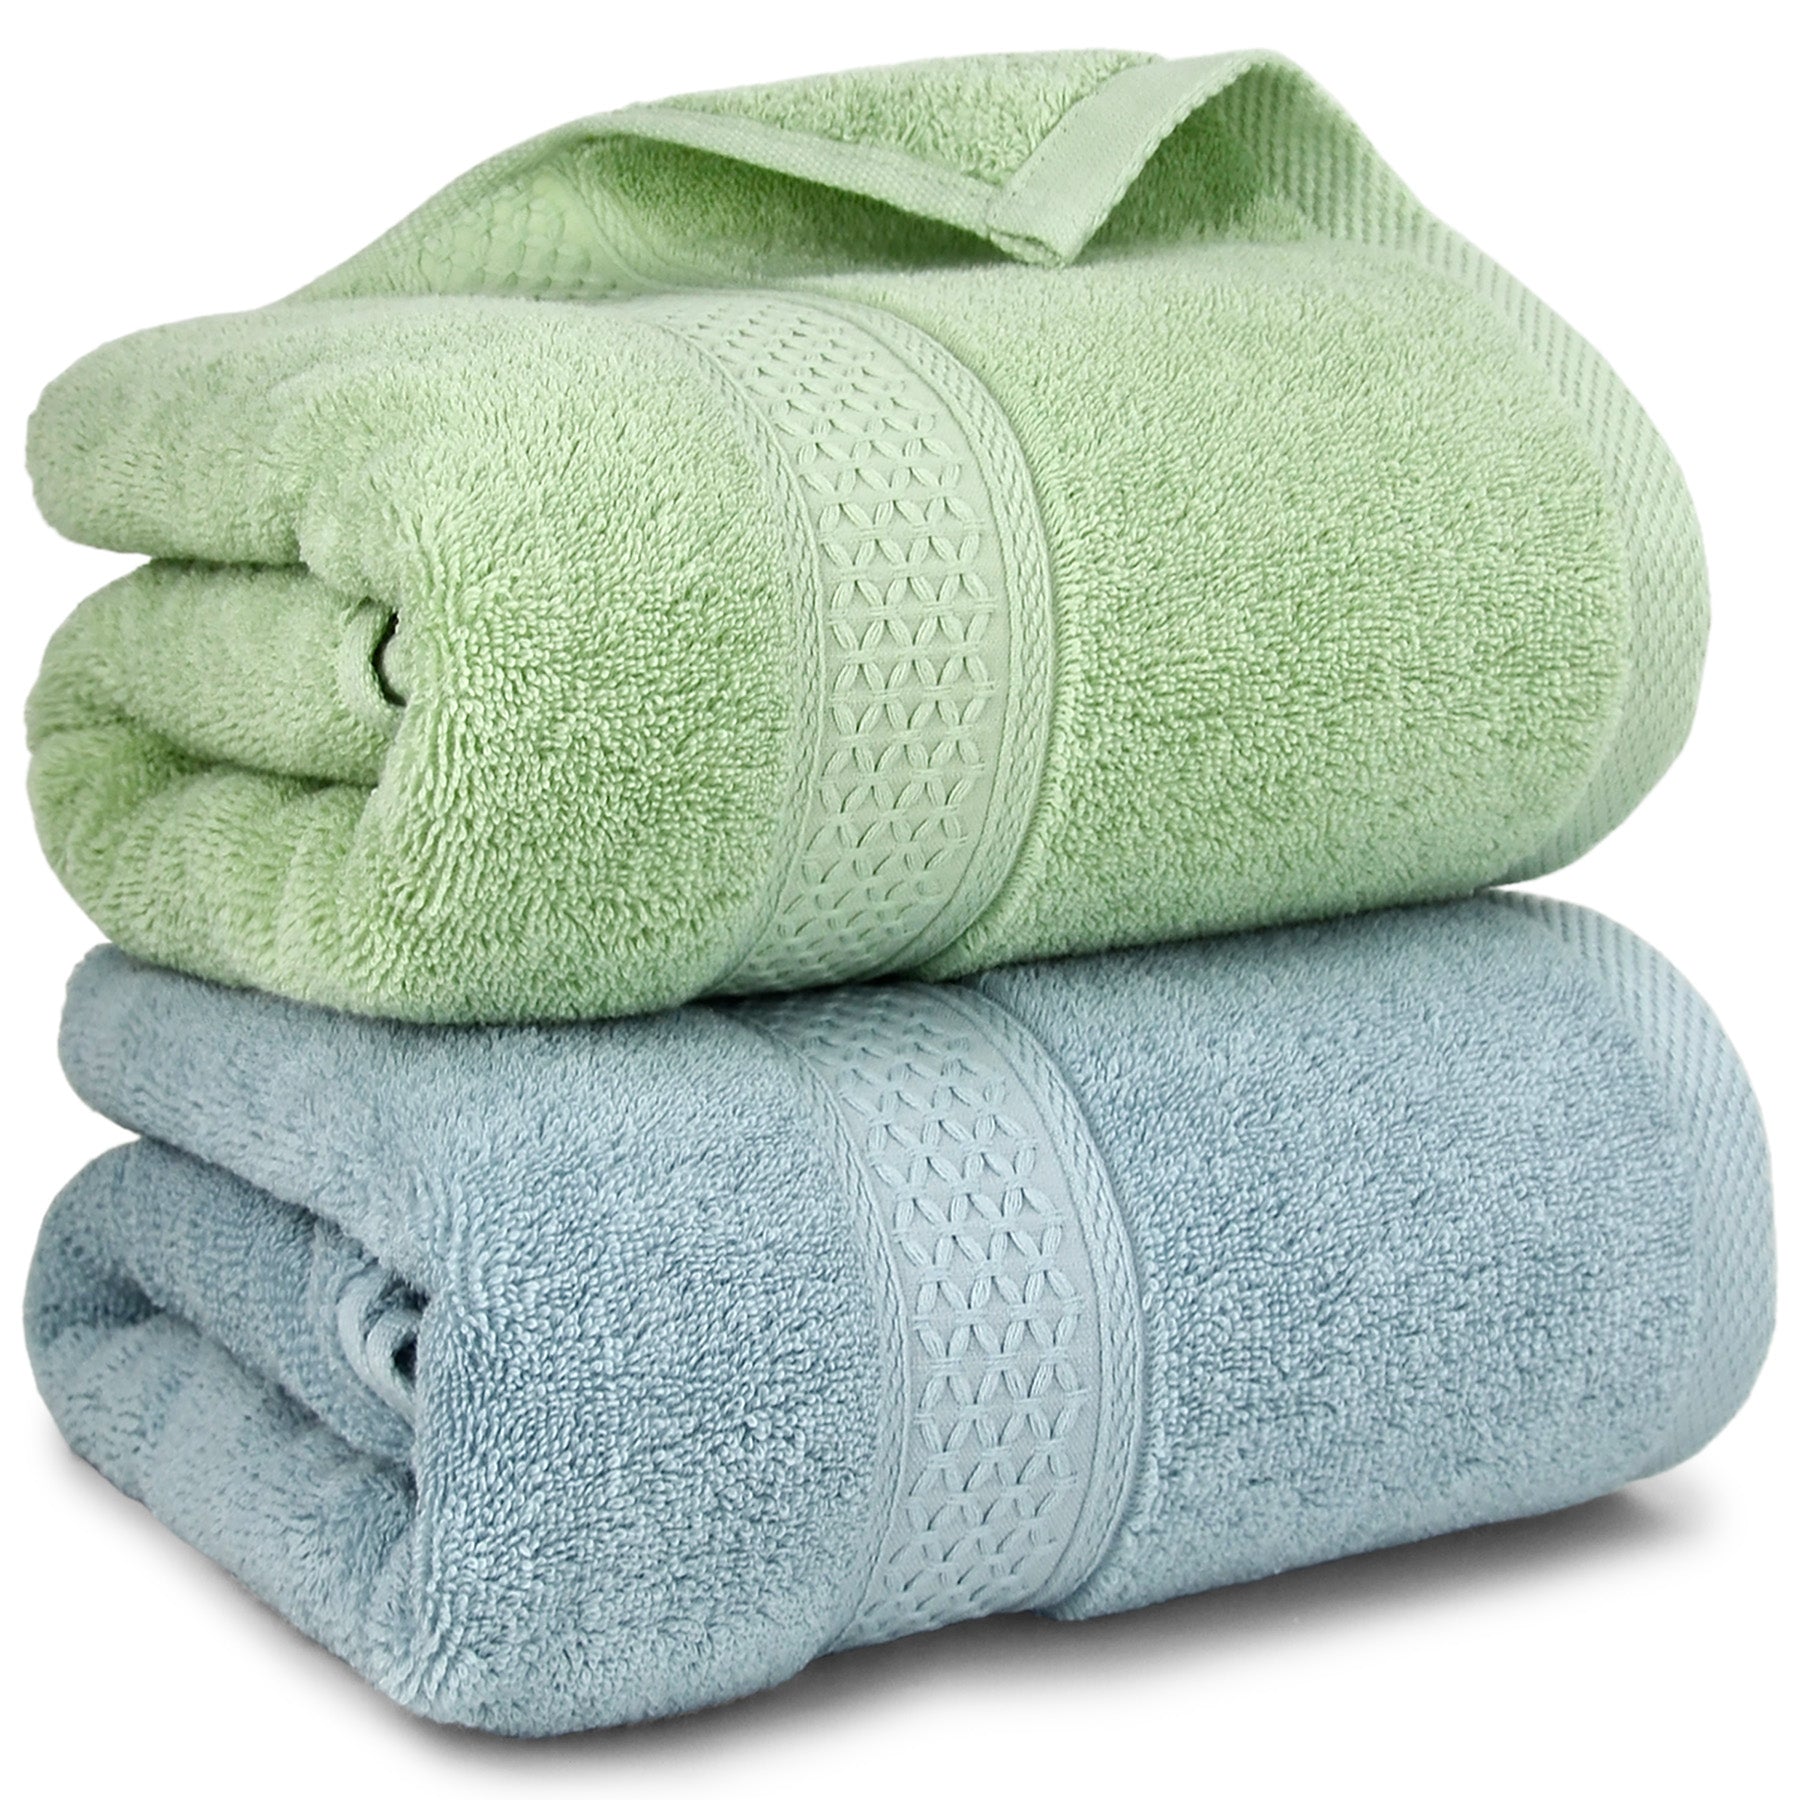 Cleanbear Cotton Hand Towel Thick Bathroom Towels - 2 Pack Peacock Blue